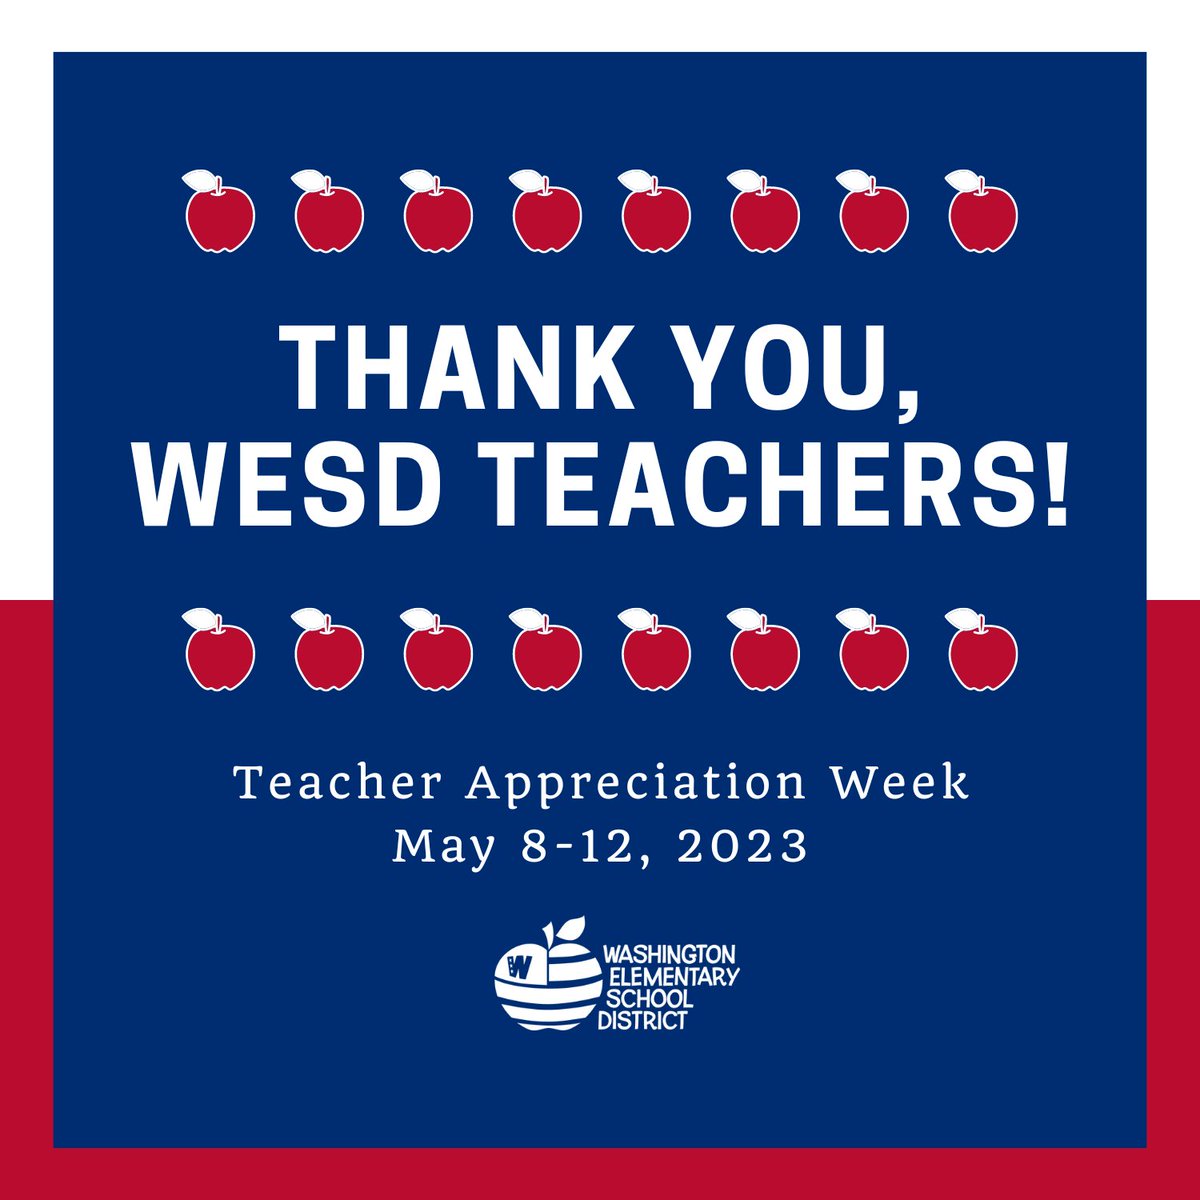 It's officially Teacher Appreciation Week! The #WESDFamily is sending a big thank you to all of our incredible teachers who truly make a difference in the lives of our students each & every day. Join us by thanking your child's teacher(s) this week for all they do! #ThankATeacher